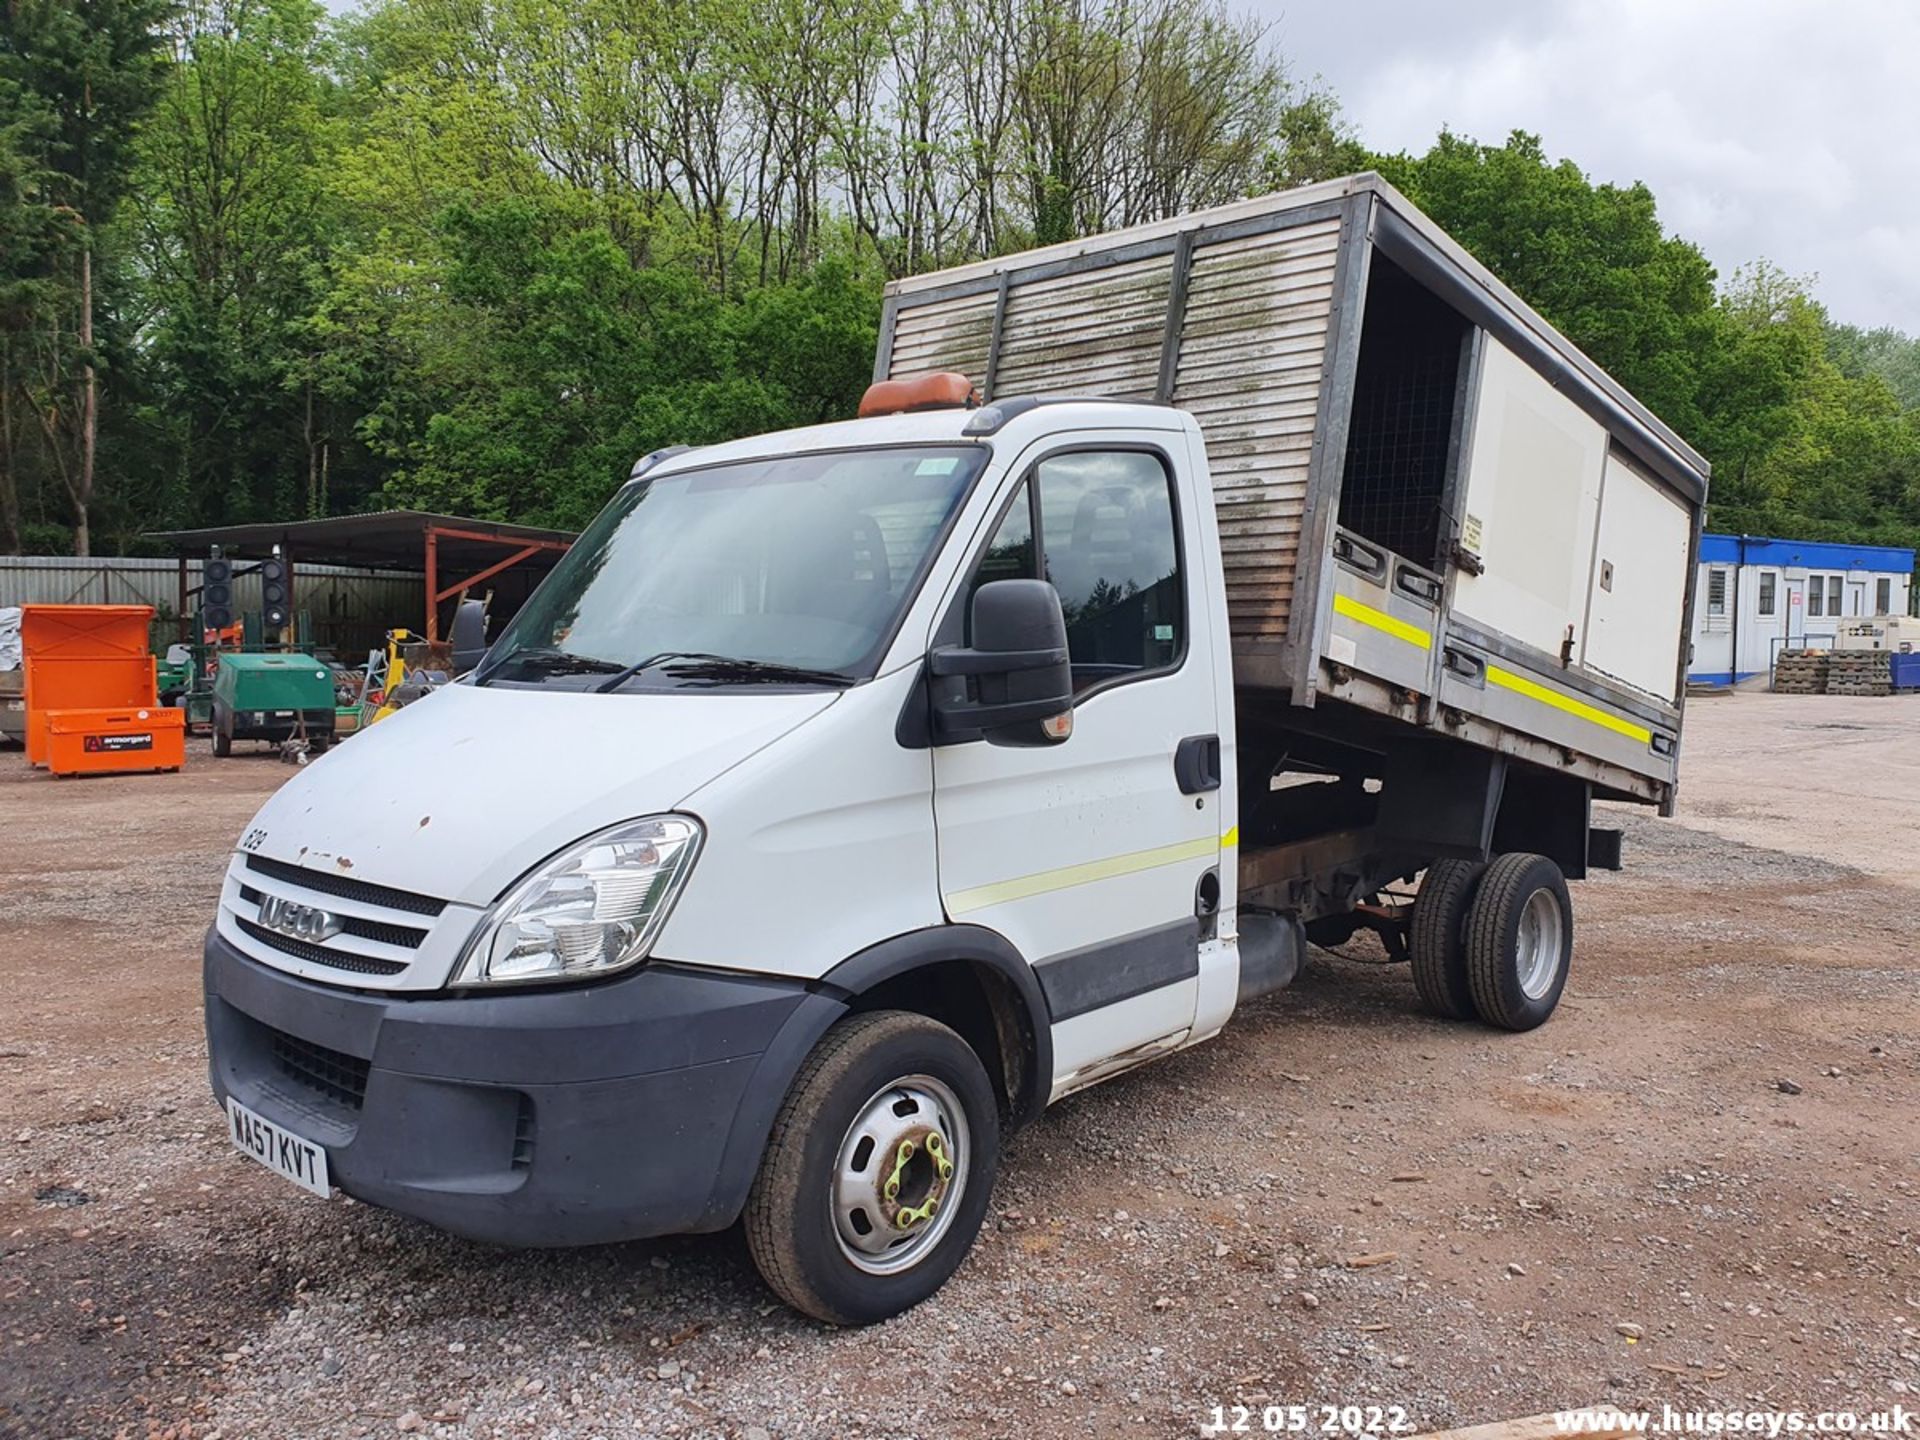 07/57 IVECO DAILY 35C15 MWB - 2998cc 2dr Tipper (White, 212k) - Image 12 of 21